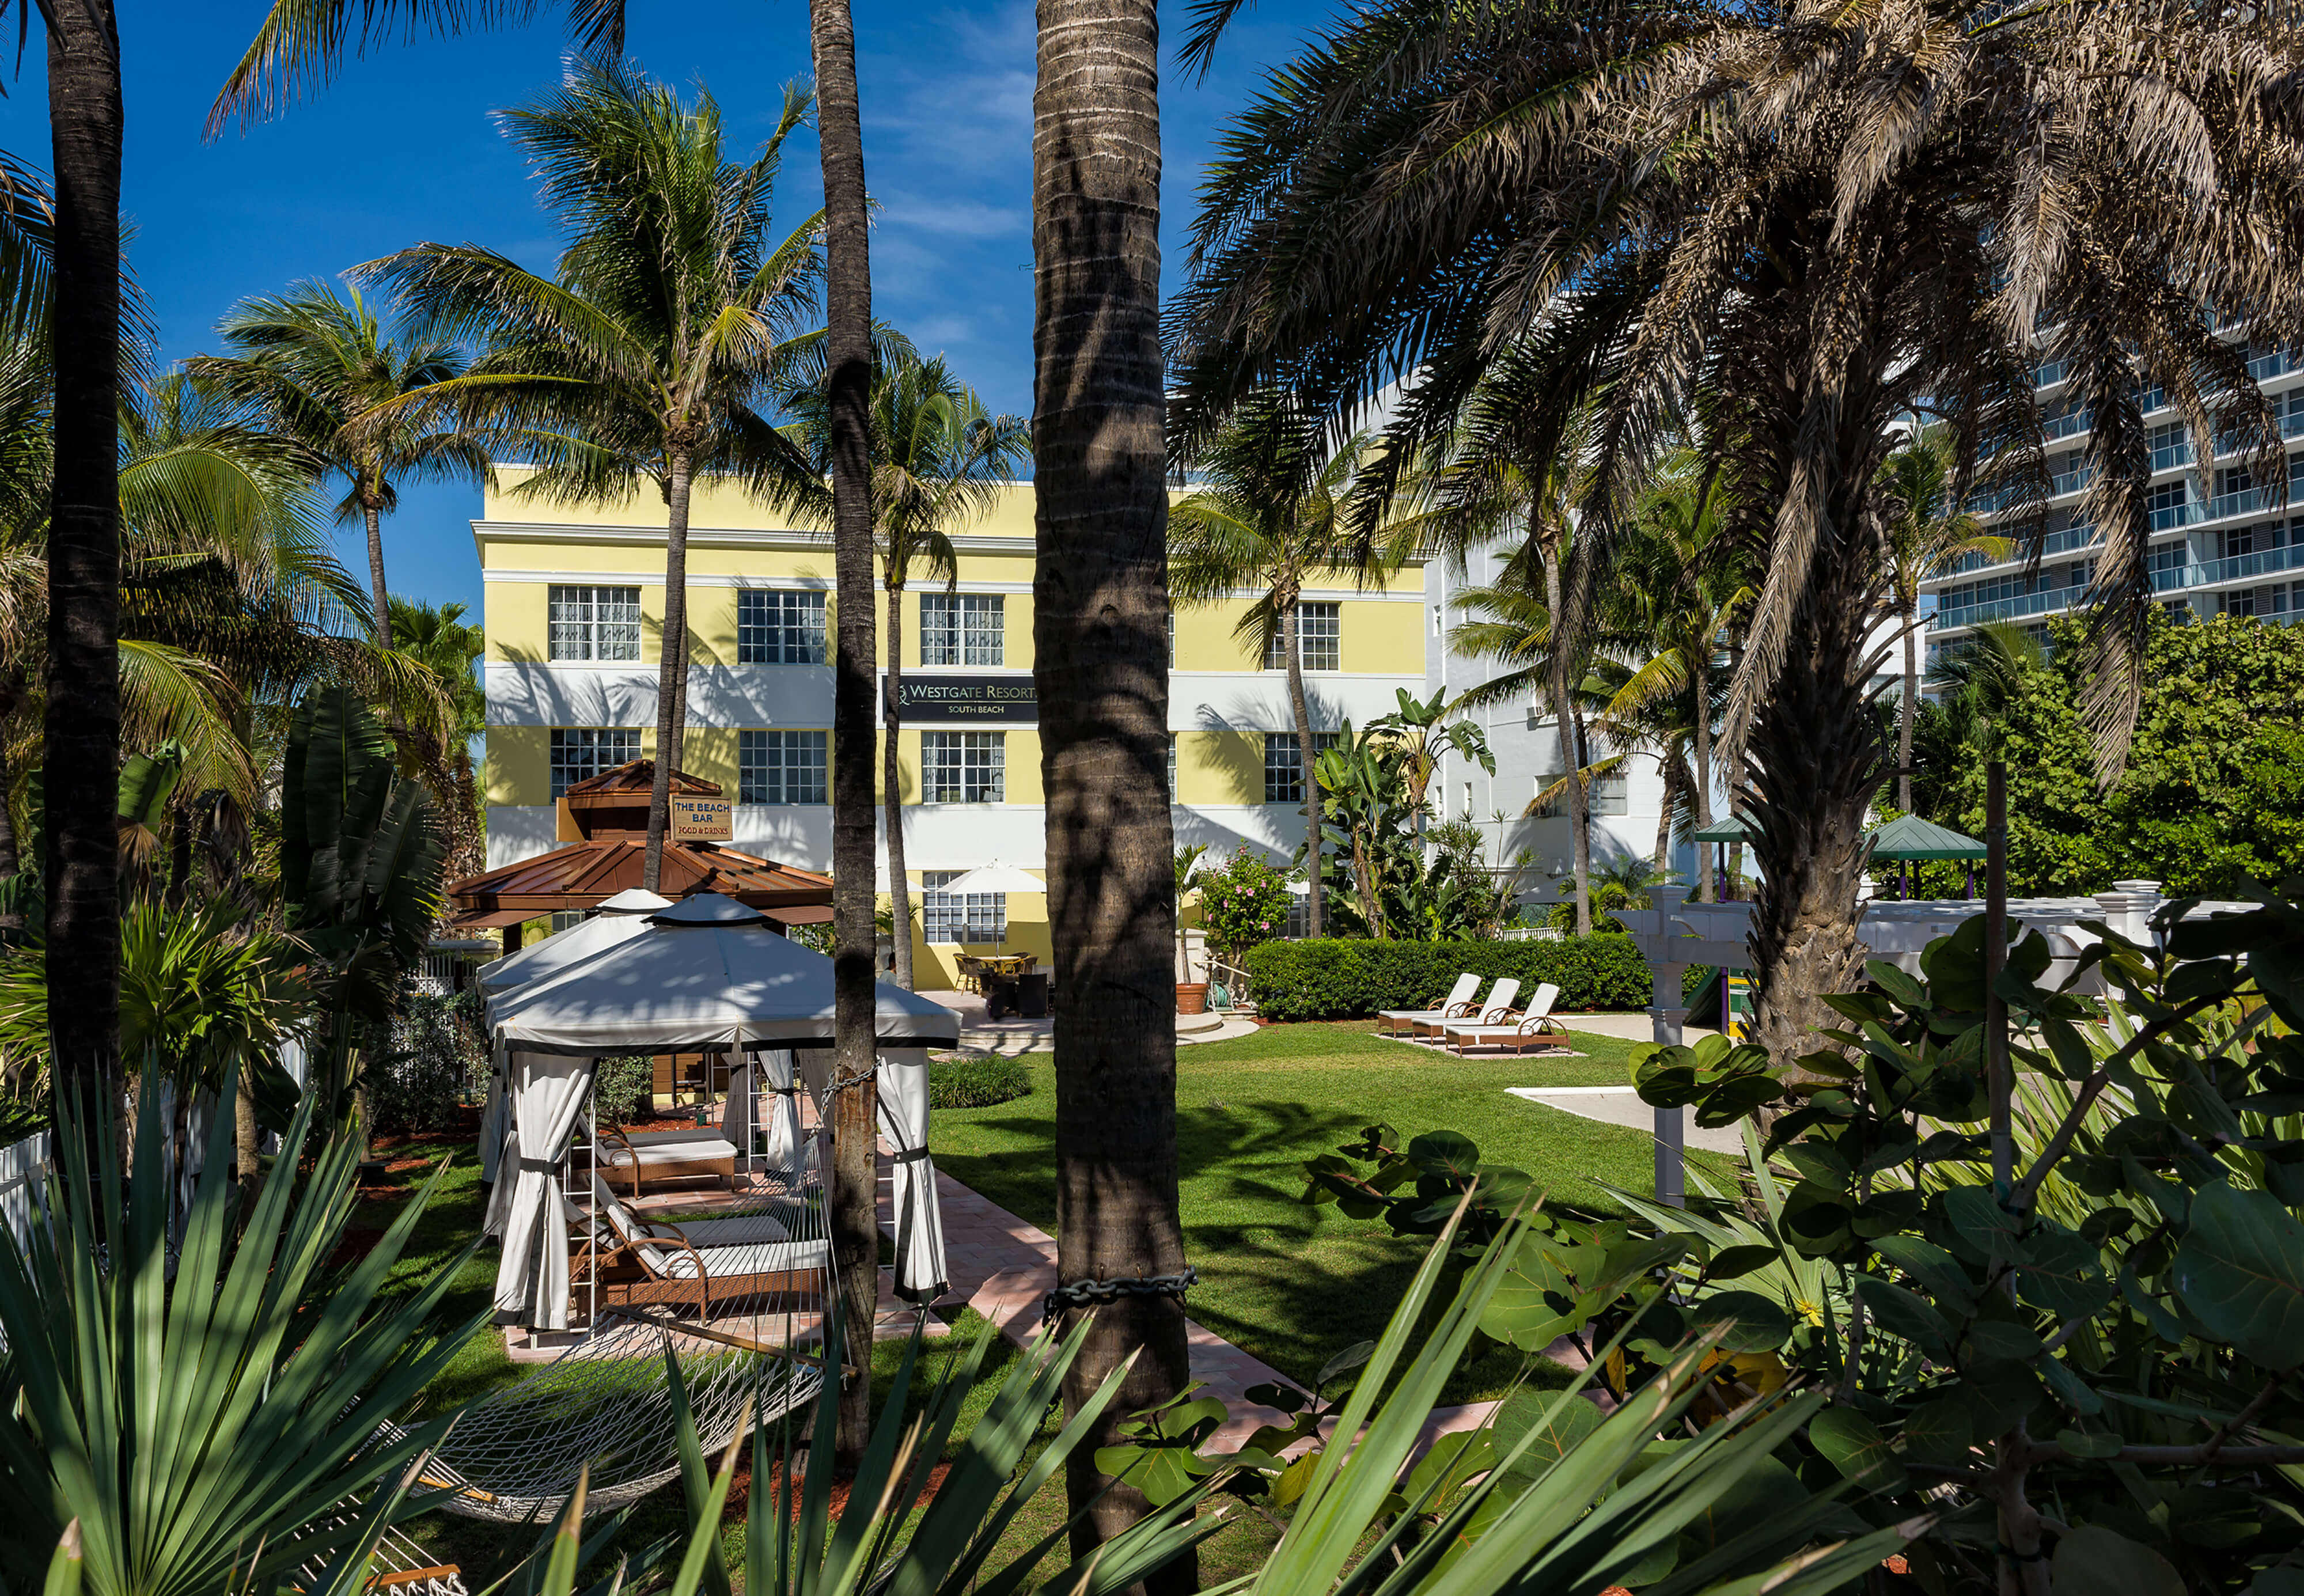 Tropically landscaped resort with private cabanas | Westgate South Beach Oceanfront Resort